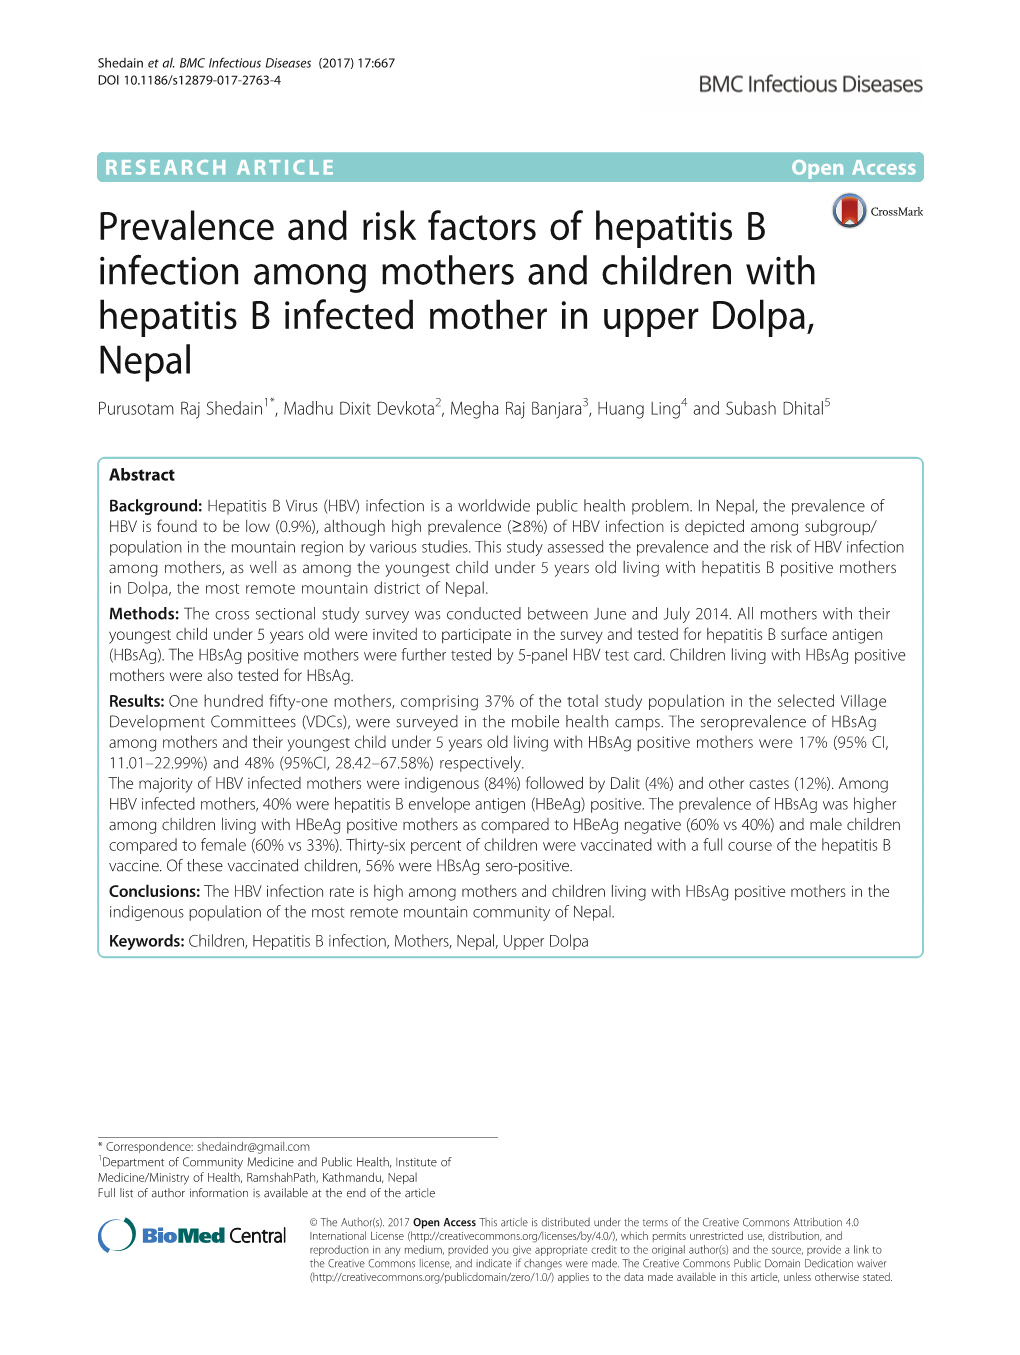 Prevalence and Risk Factors of Hepatitis B Infection Among Mothers and Children with Hepatitis B Infected Mother in Upper Dolpa